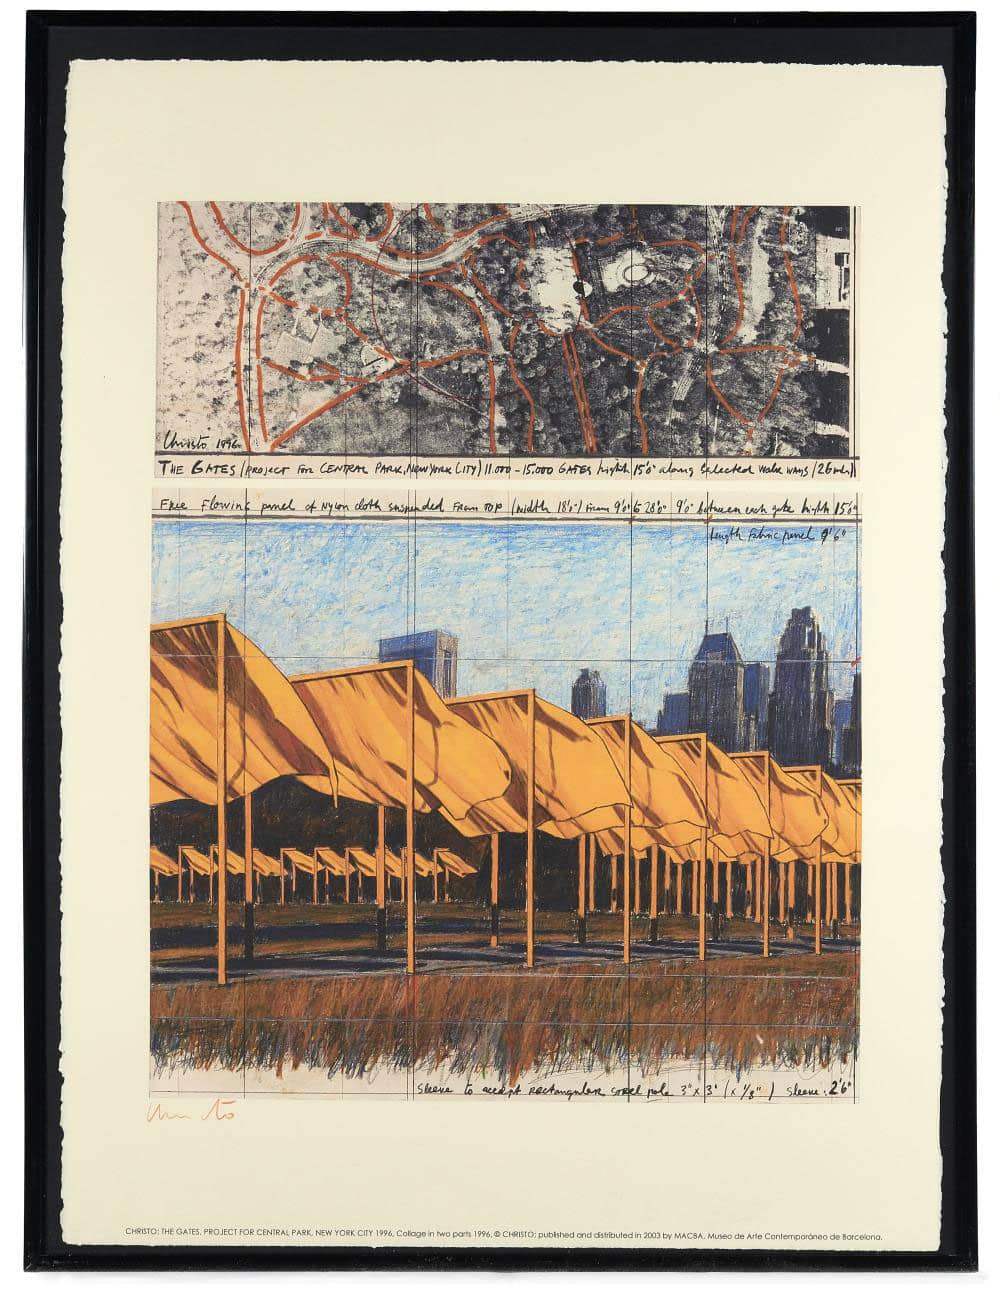 christo-the-gates-project-for-central-park-001shop